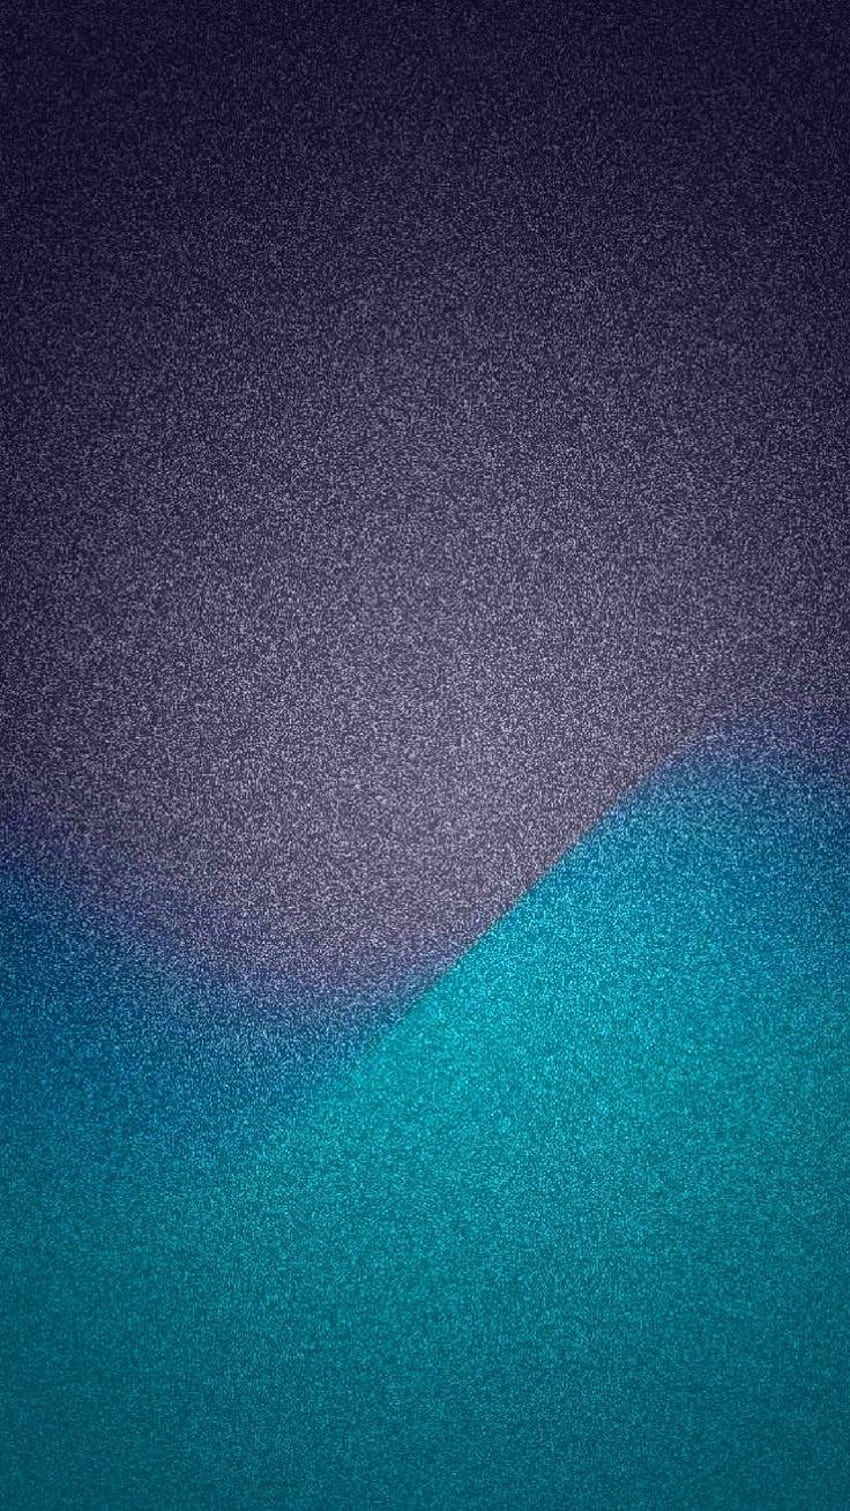 Simple Clear Iphone Wallpaper Download | MobCup-mncb.edu.vn